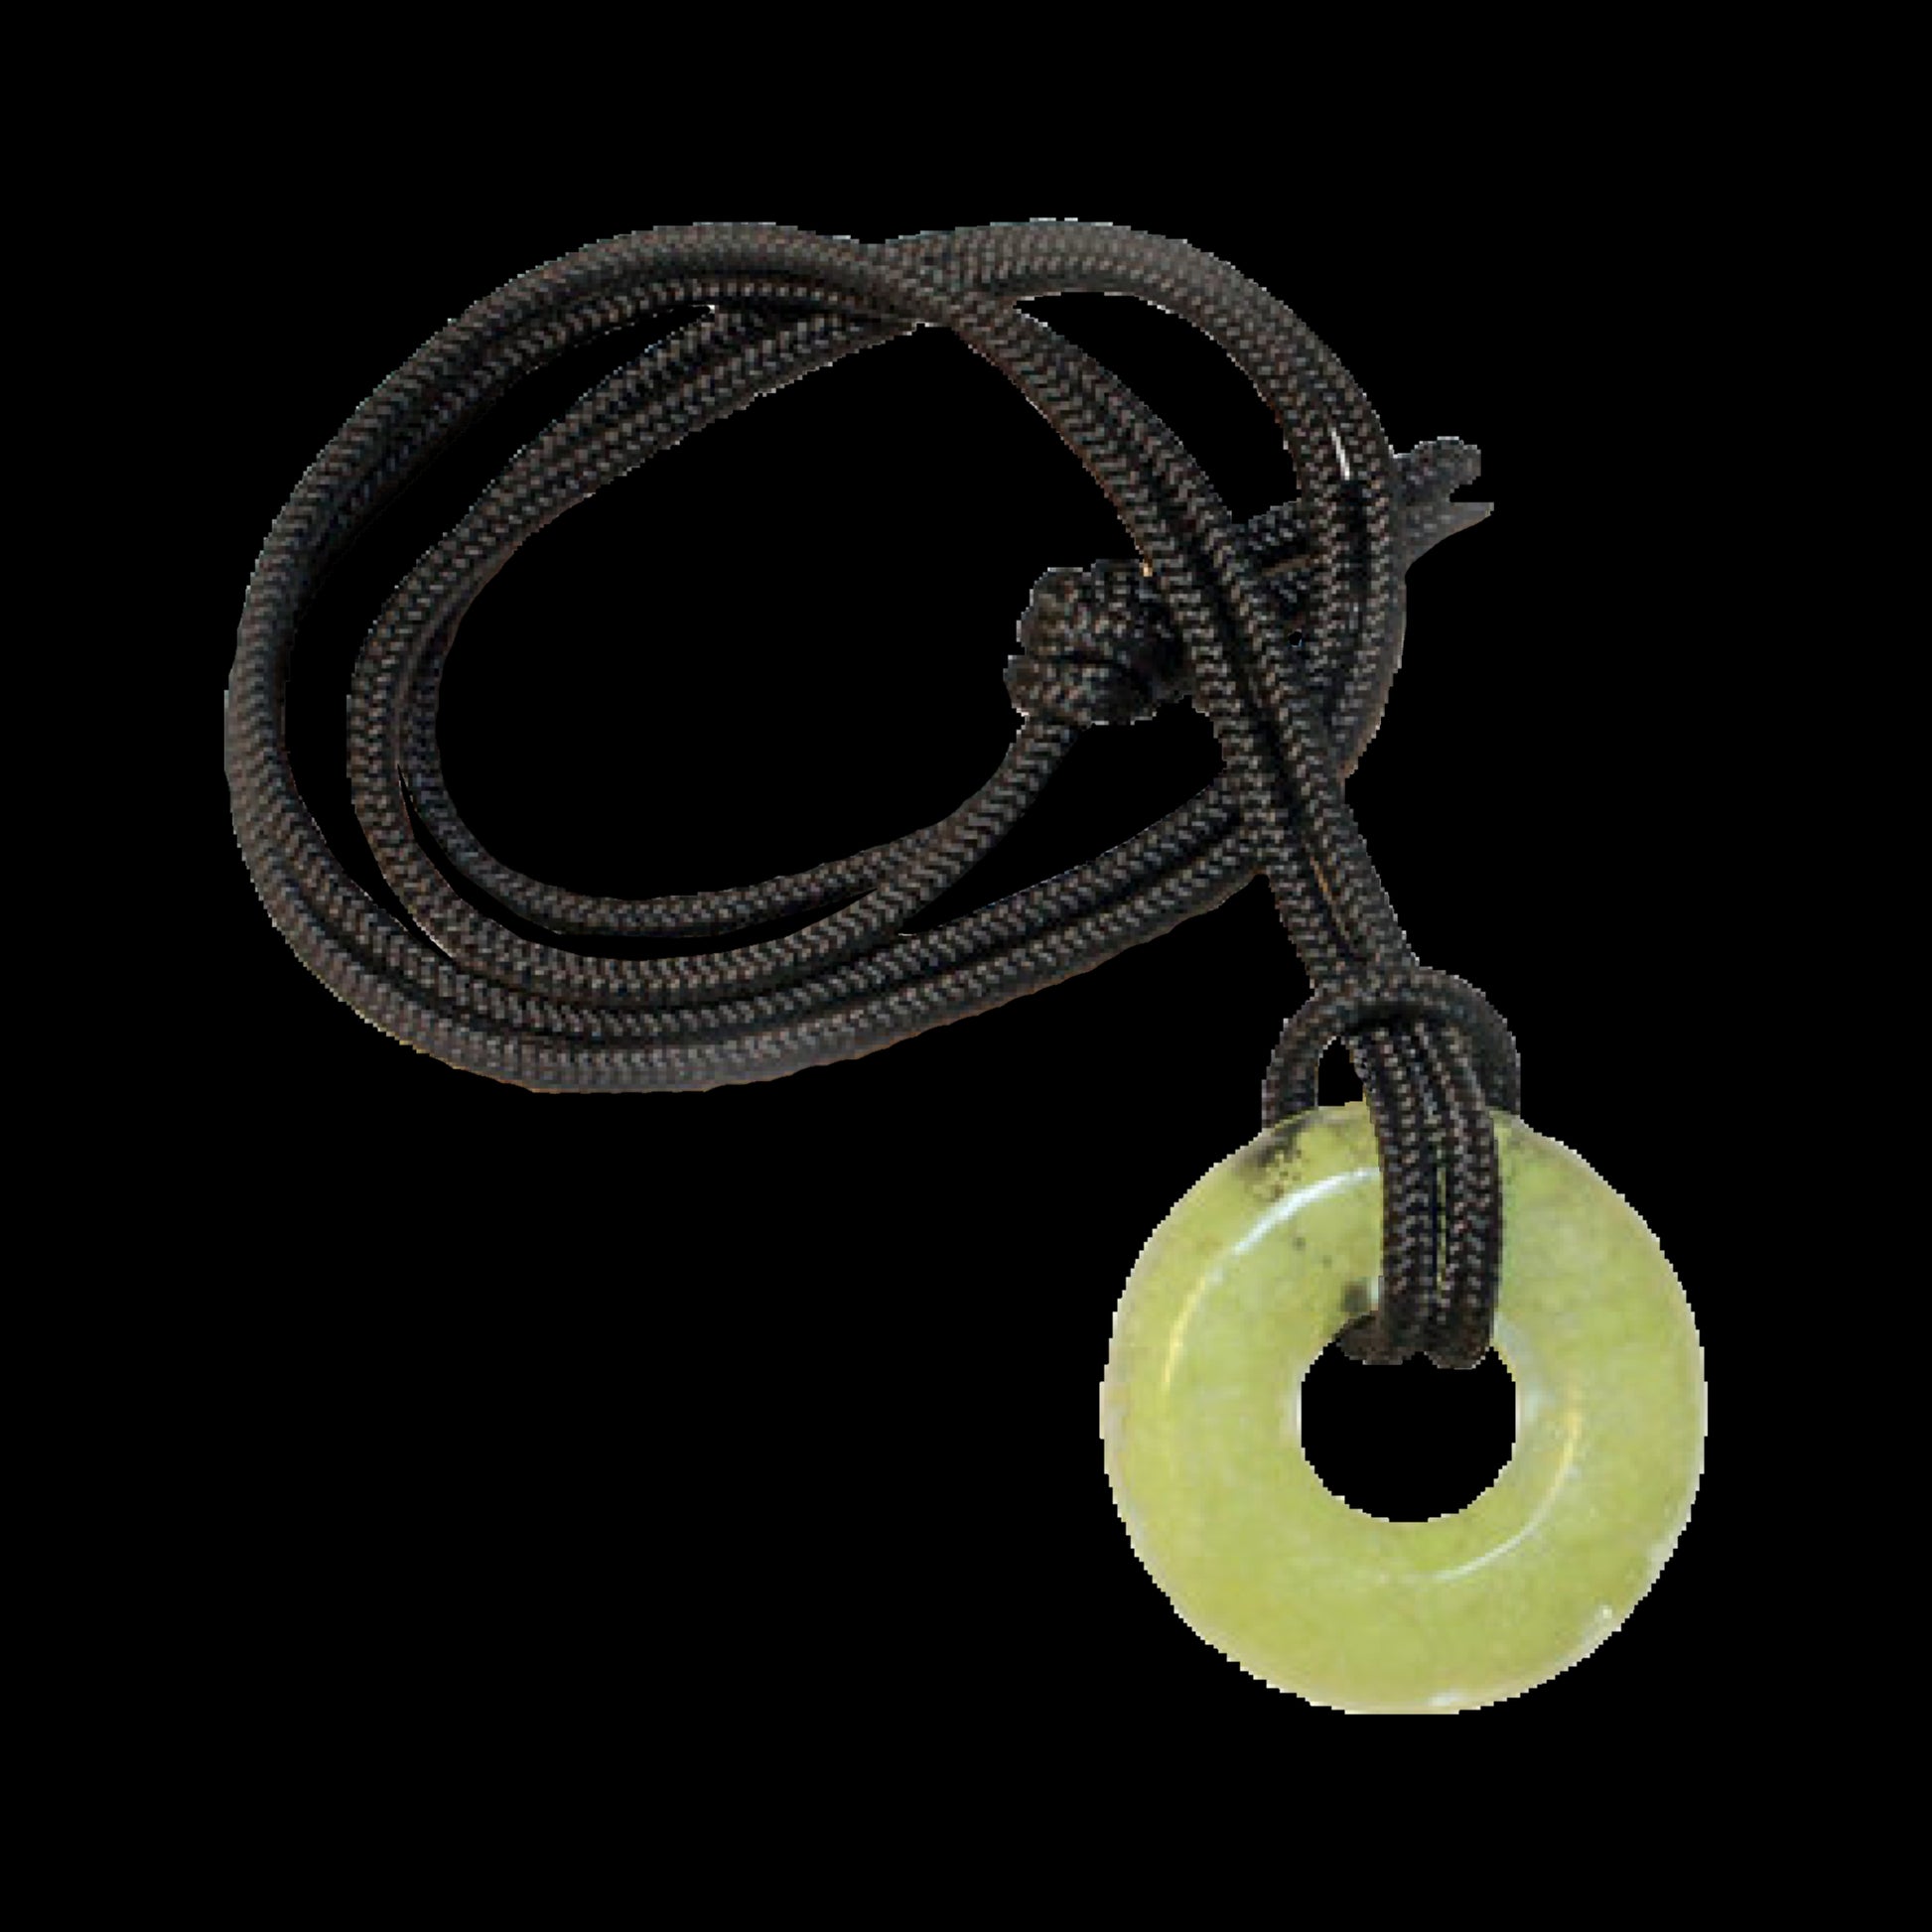 Glow in the dark round circle necklace rave spirituality and safety